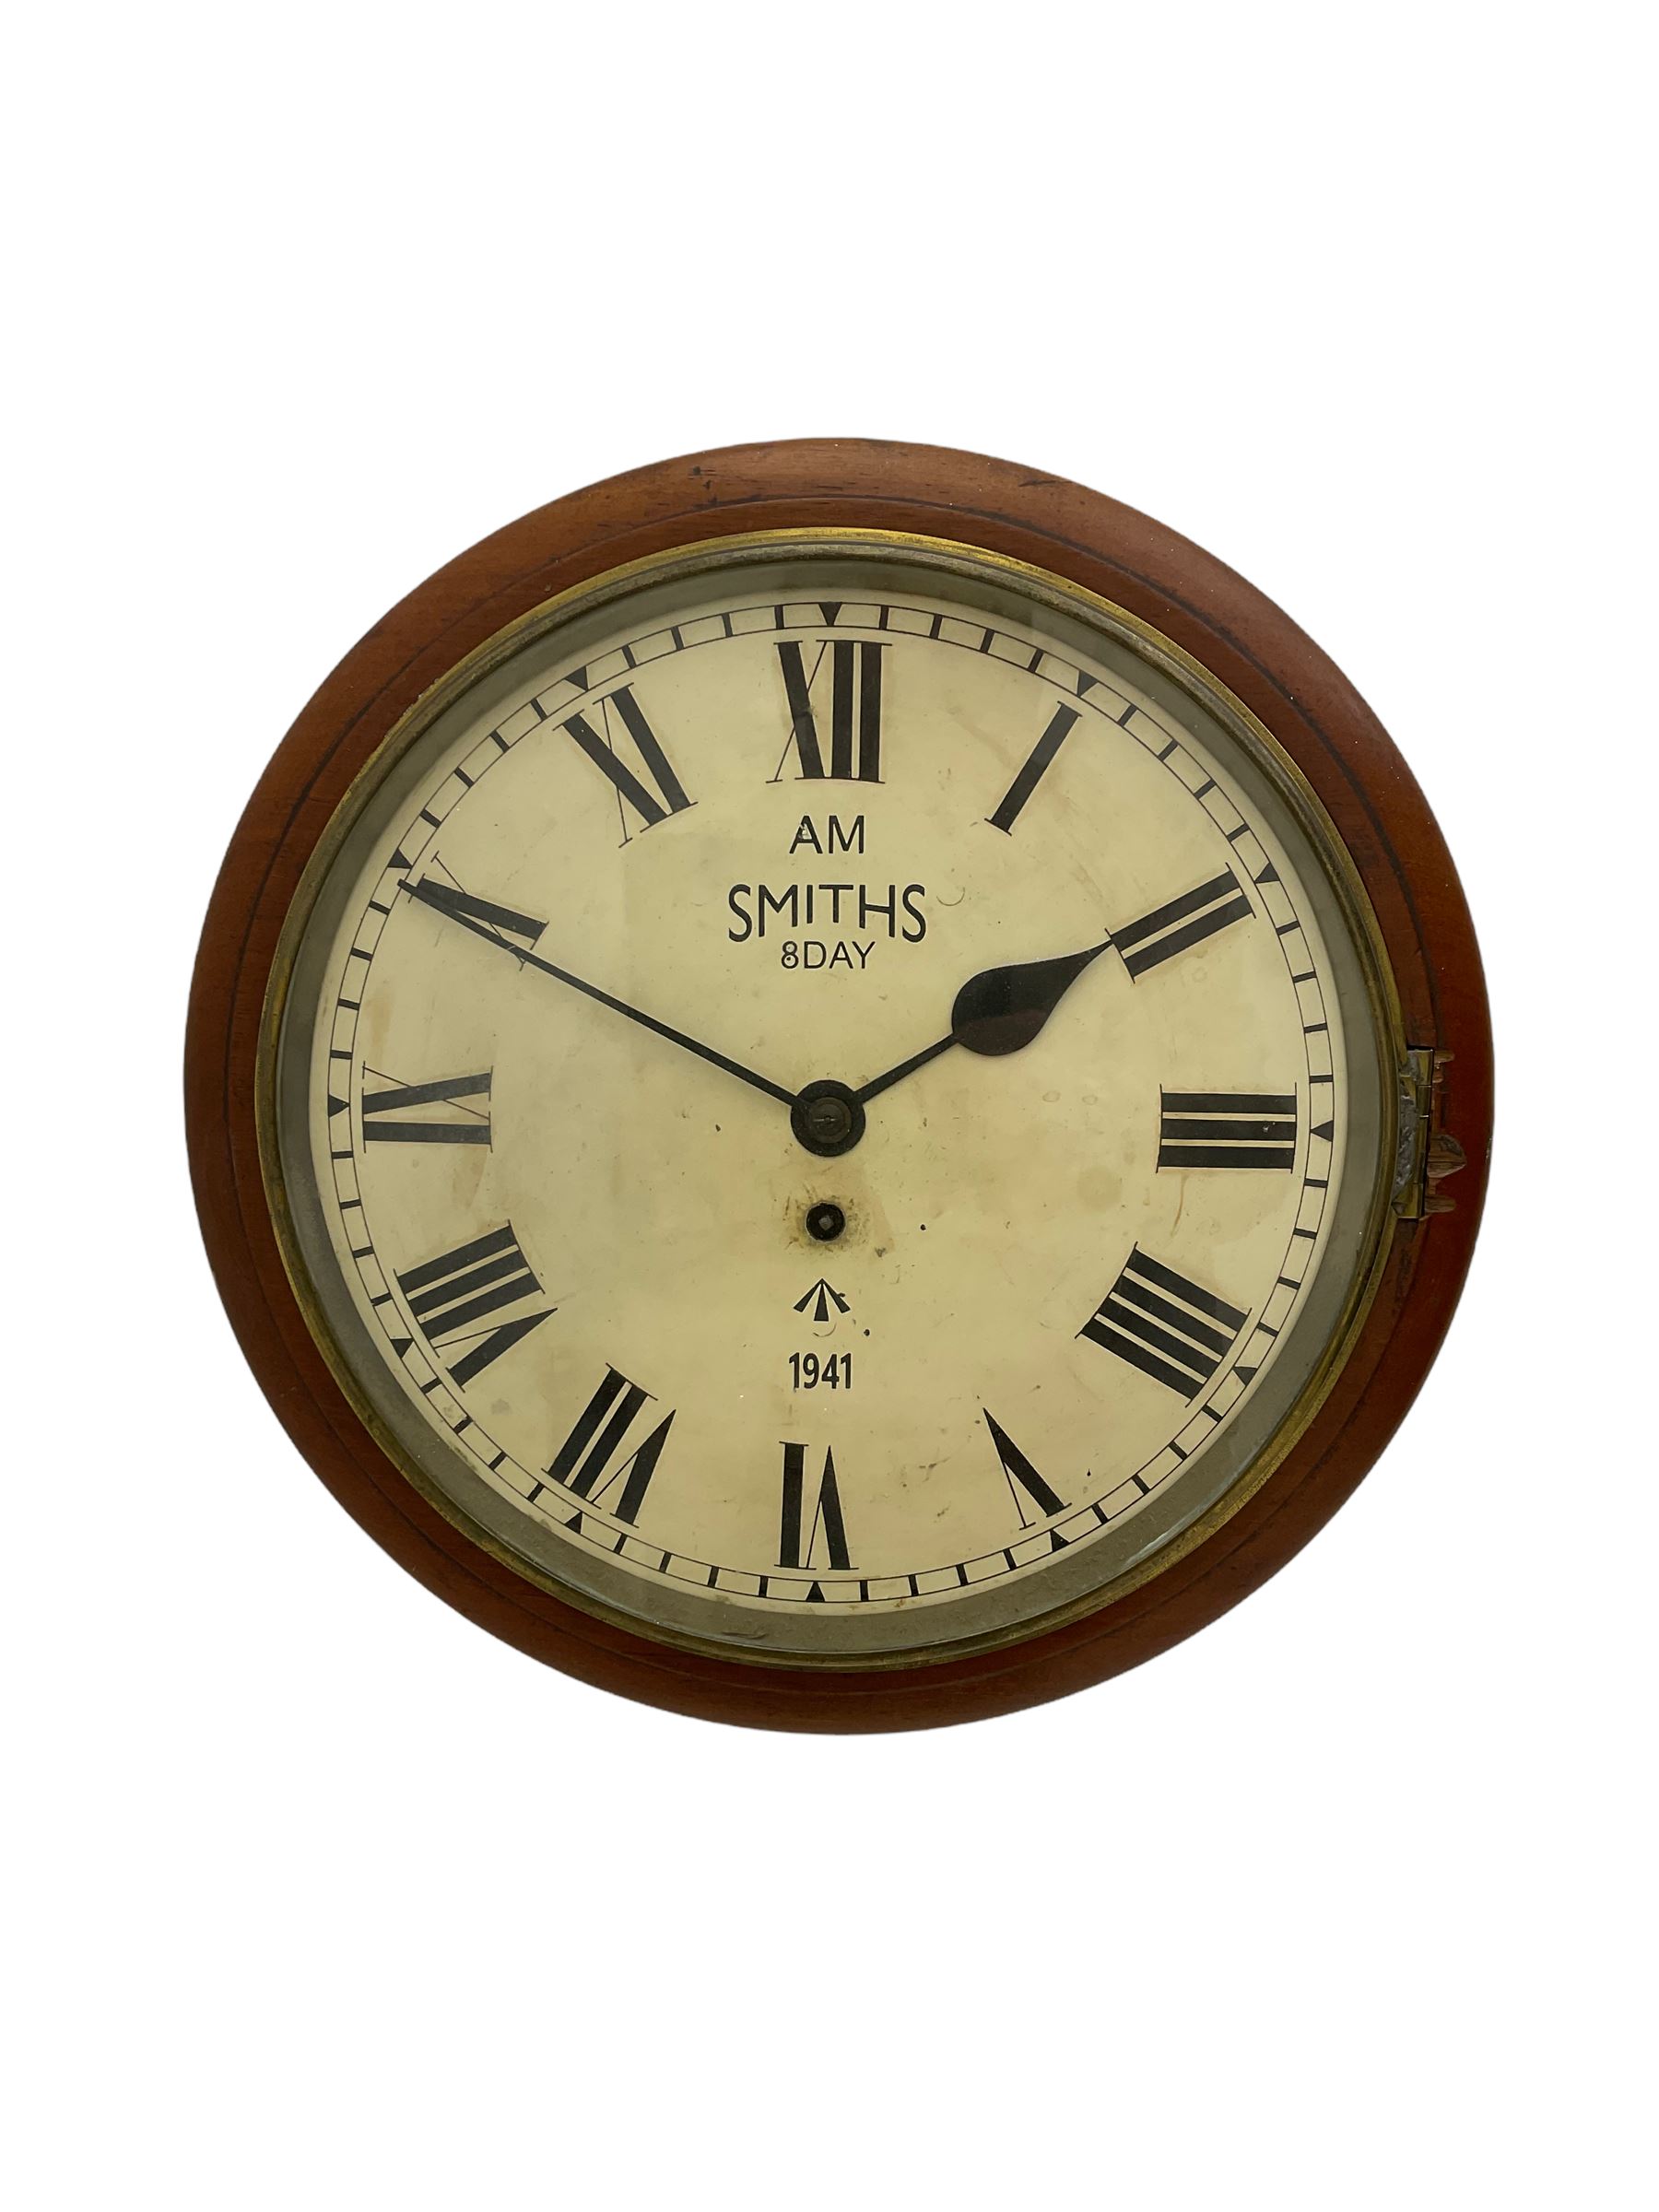 A round dial wall clock with a 15” mahogany bezel and 12” painted dial, with Roman